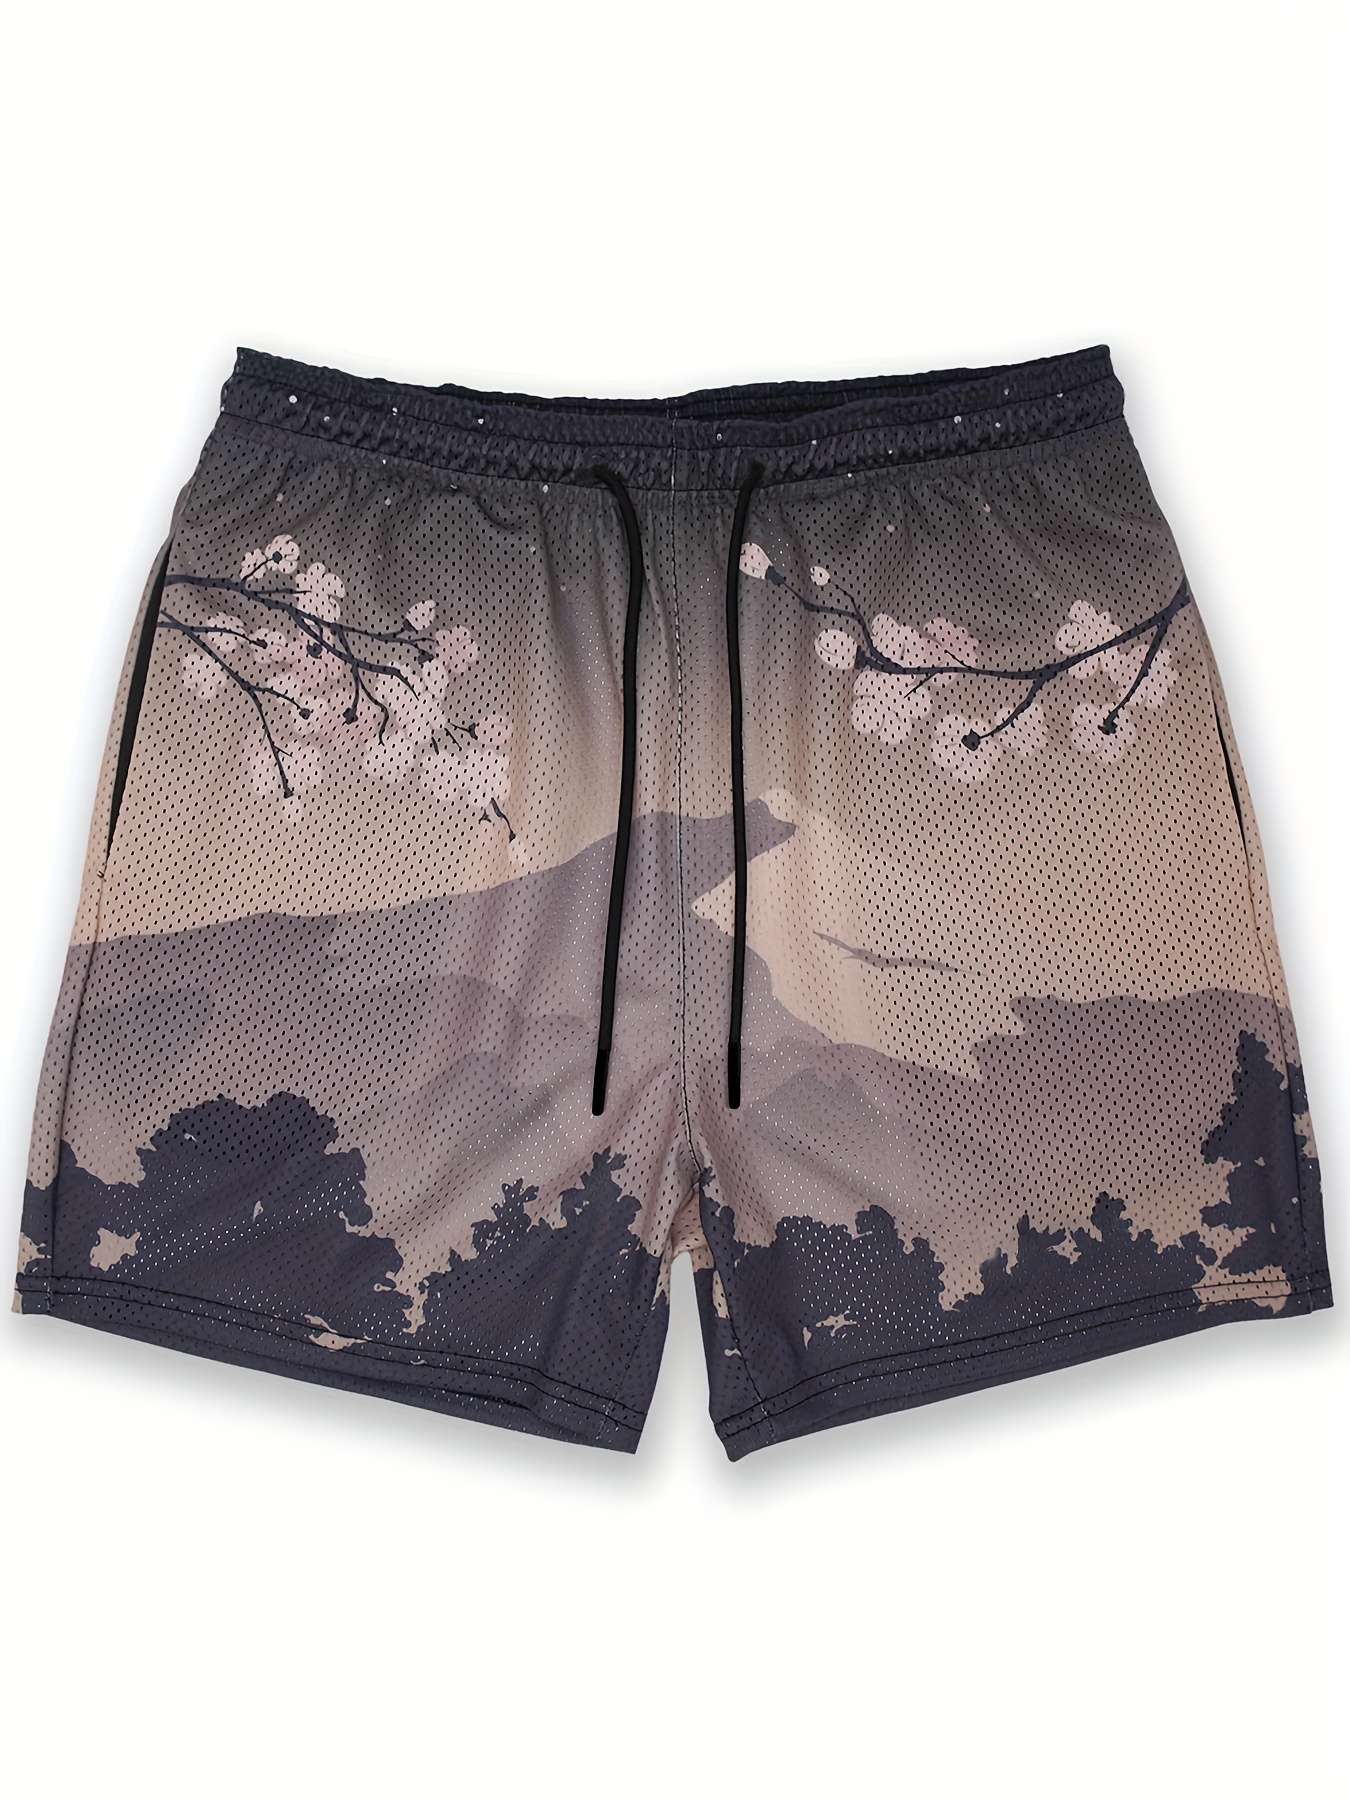 Men's Graphic Print Quick Dry Loose Shorts, Active Slightly Stretch  Breathable Moisture Wicking Drawstring Shorts For Basketball Training  Running Mara